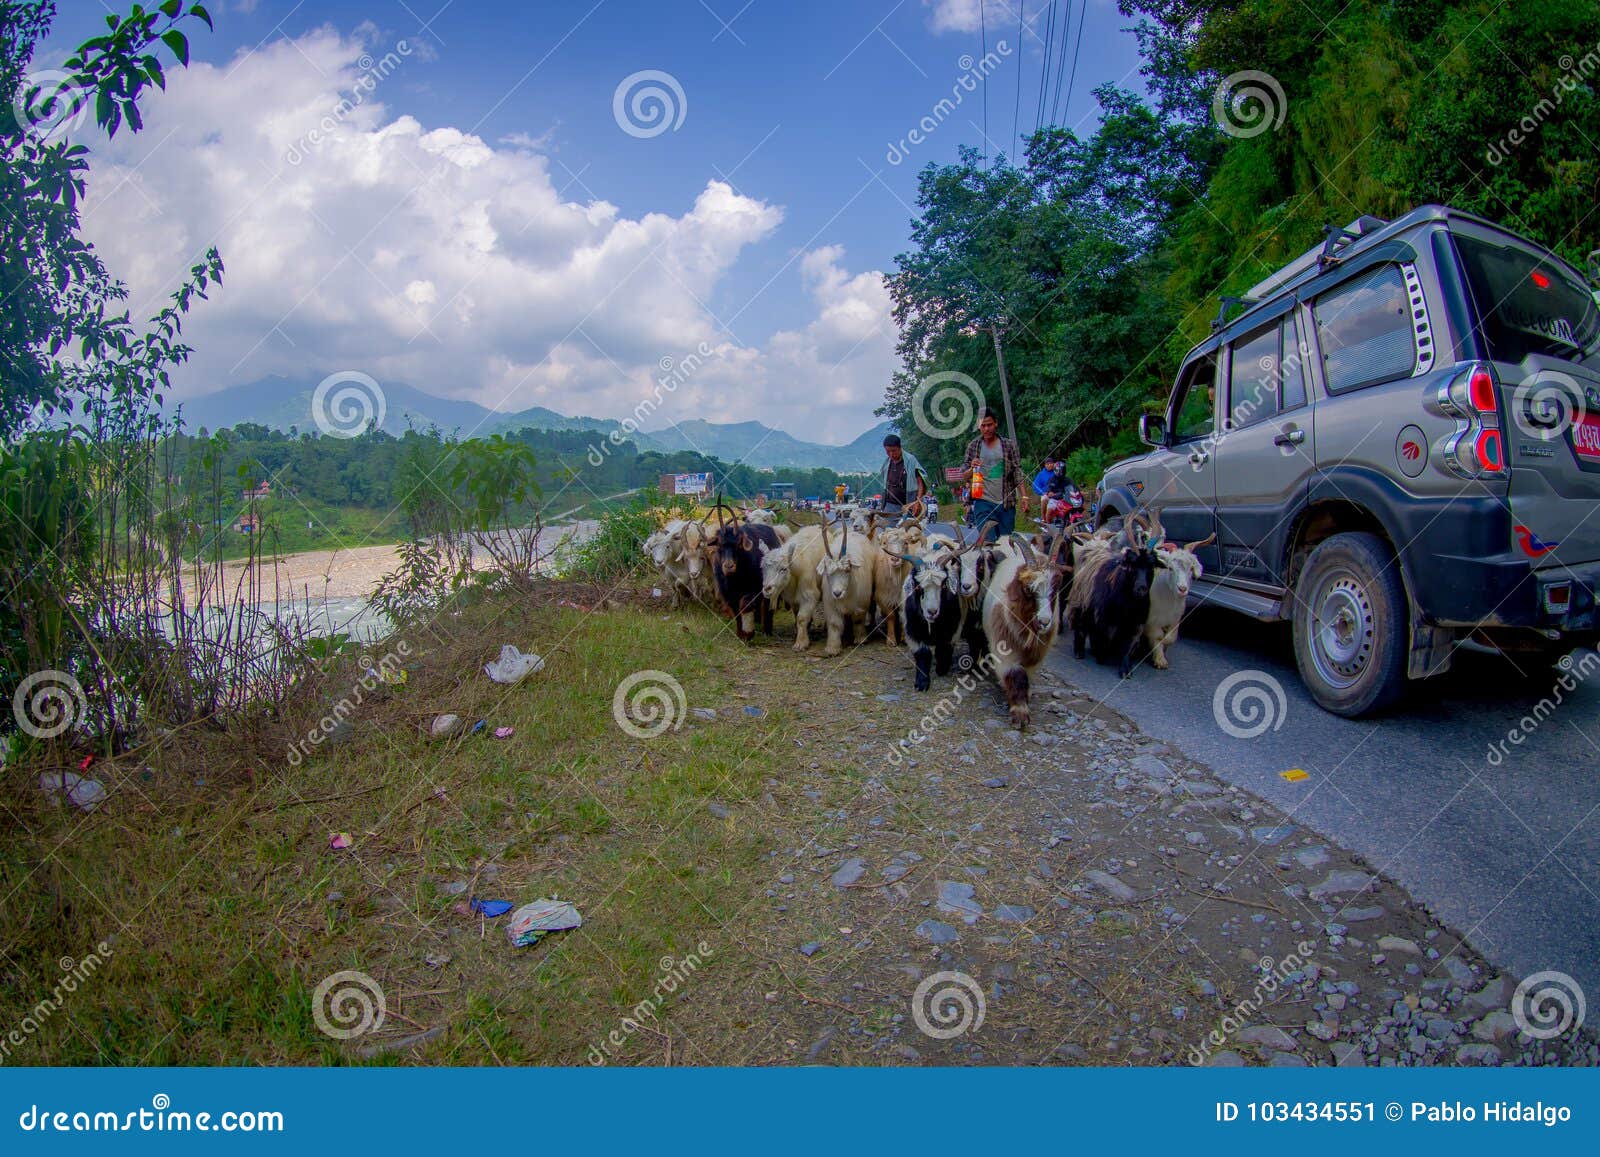 POKHARA, NEPAL, SEPTEMBER 04, 2017: Shepherds take care of flocks of goats, going along the street with some cars parked of small town in Pokhara, Nepal.